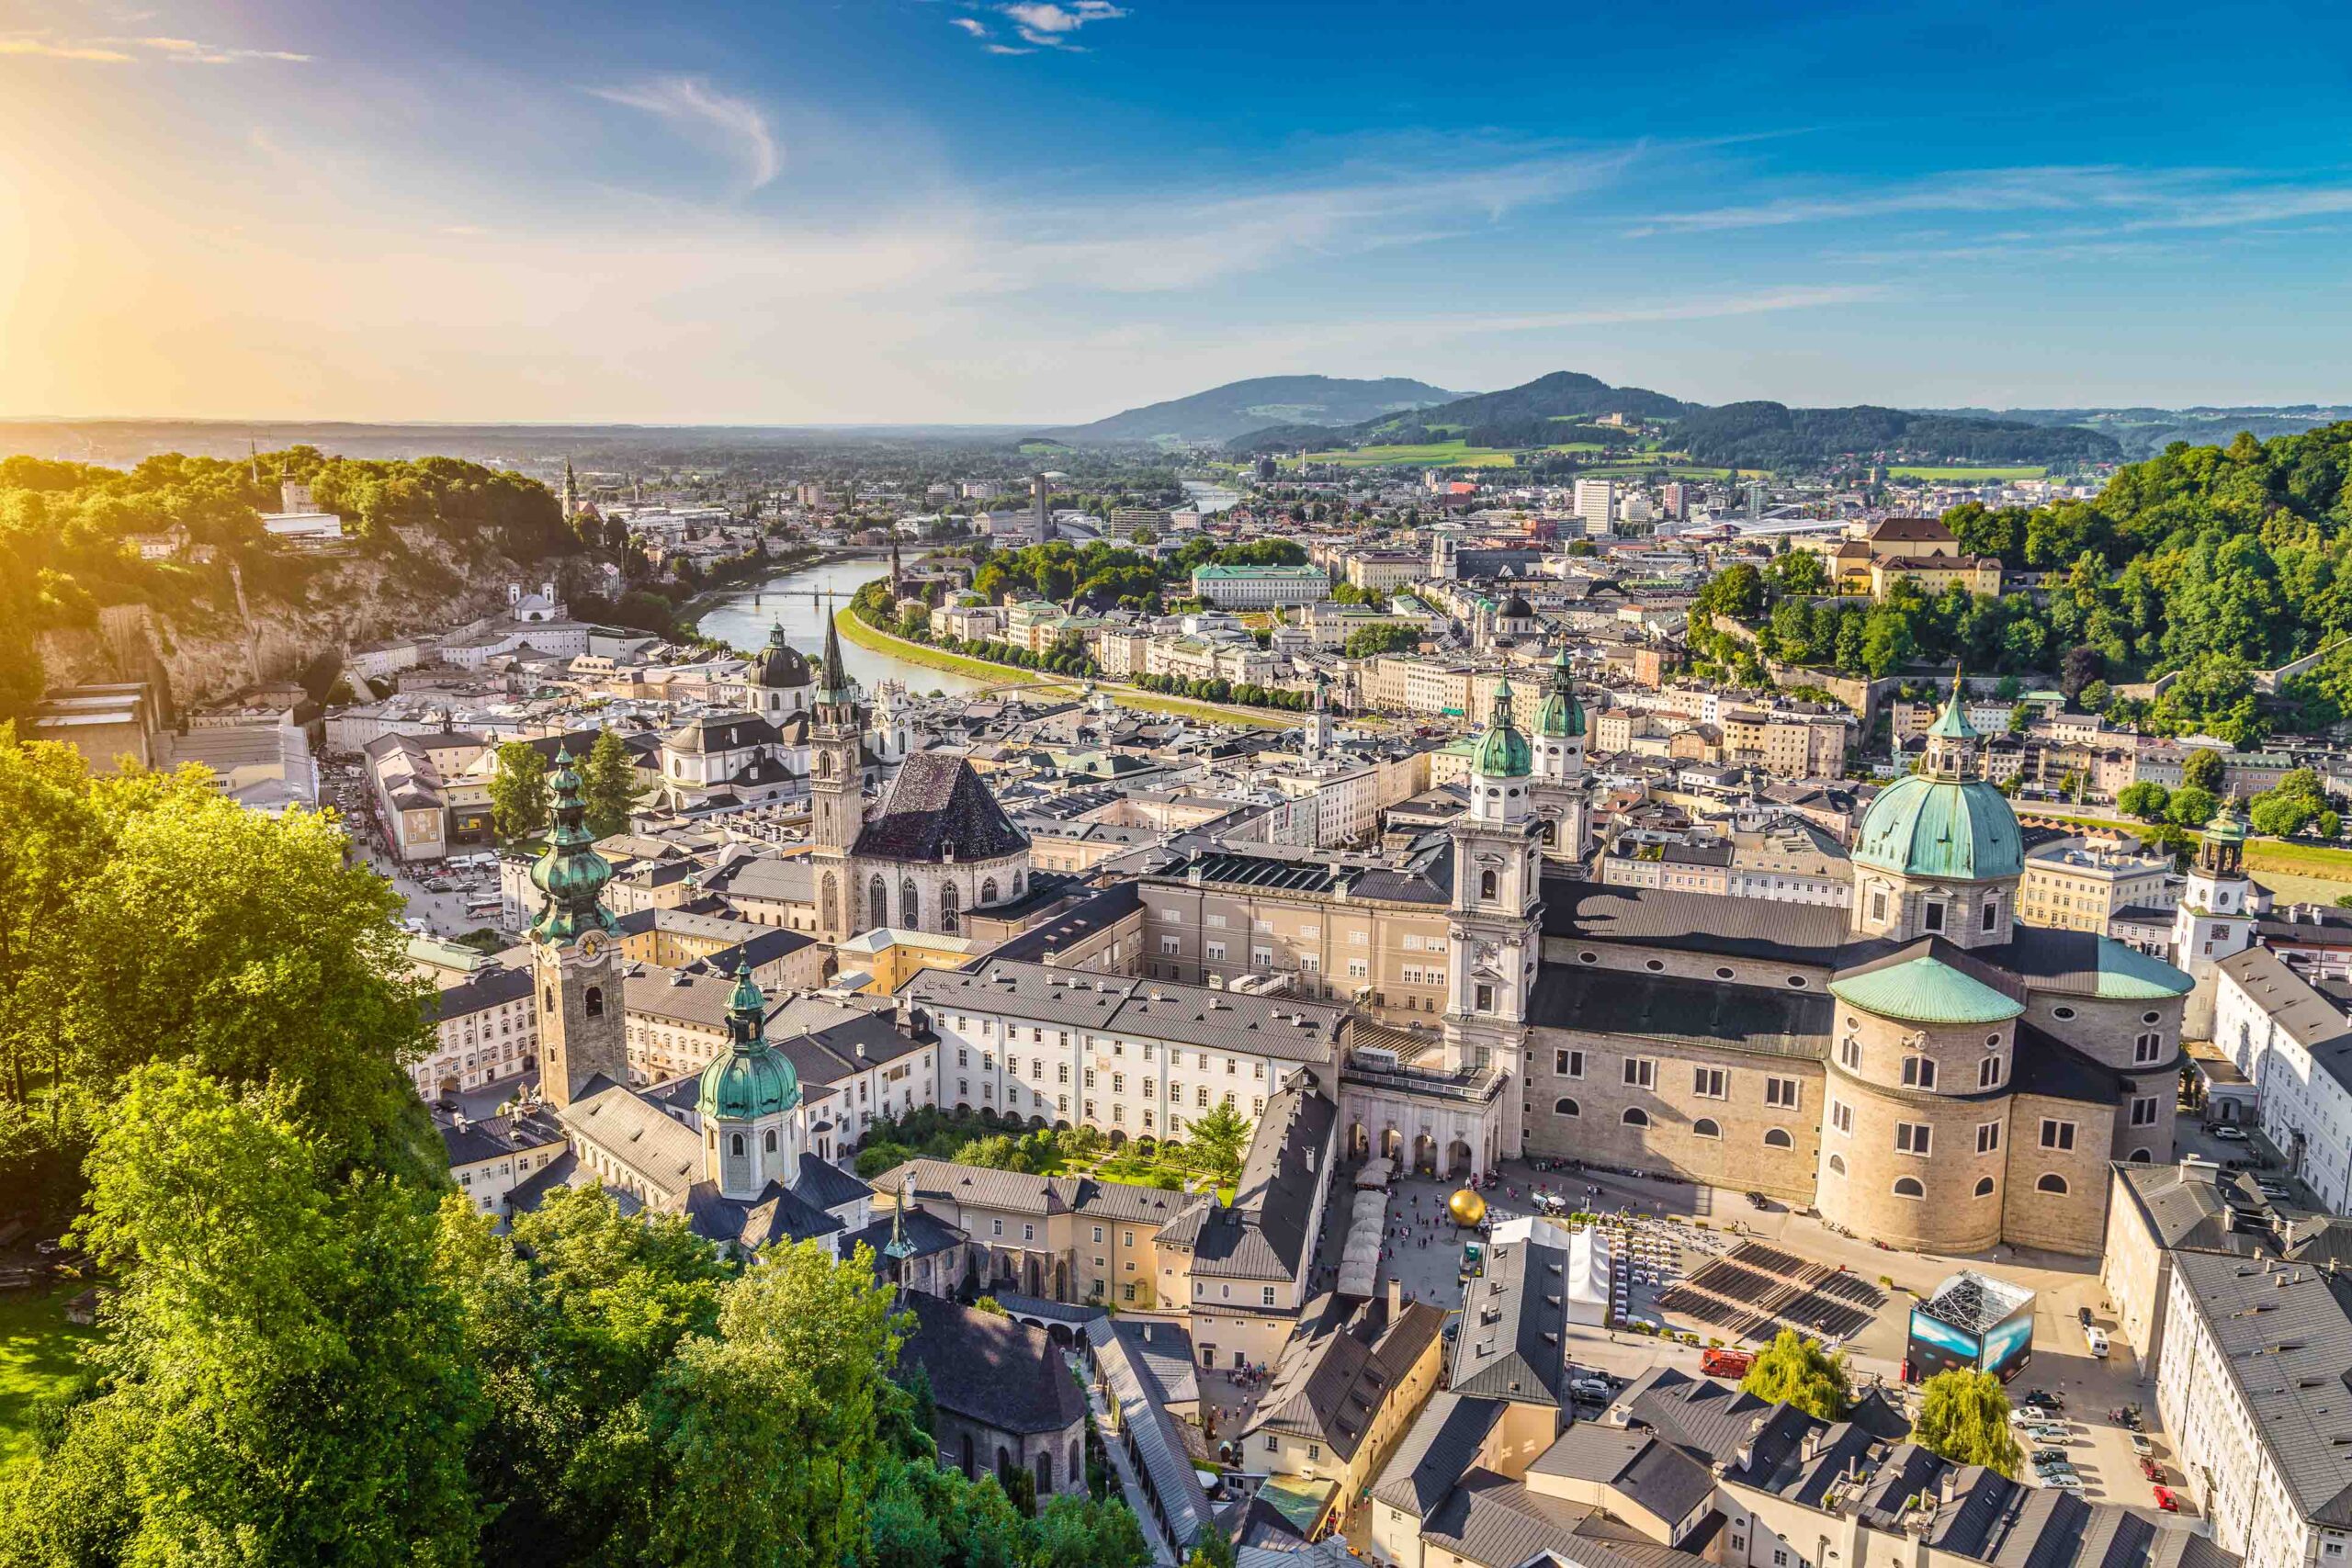 Aerial view of the historic city of Salzburg, Austria